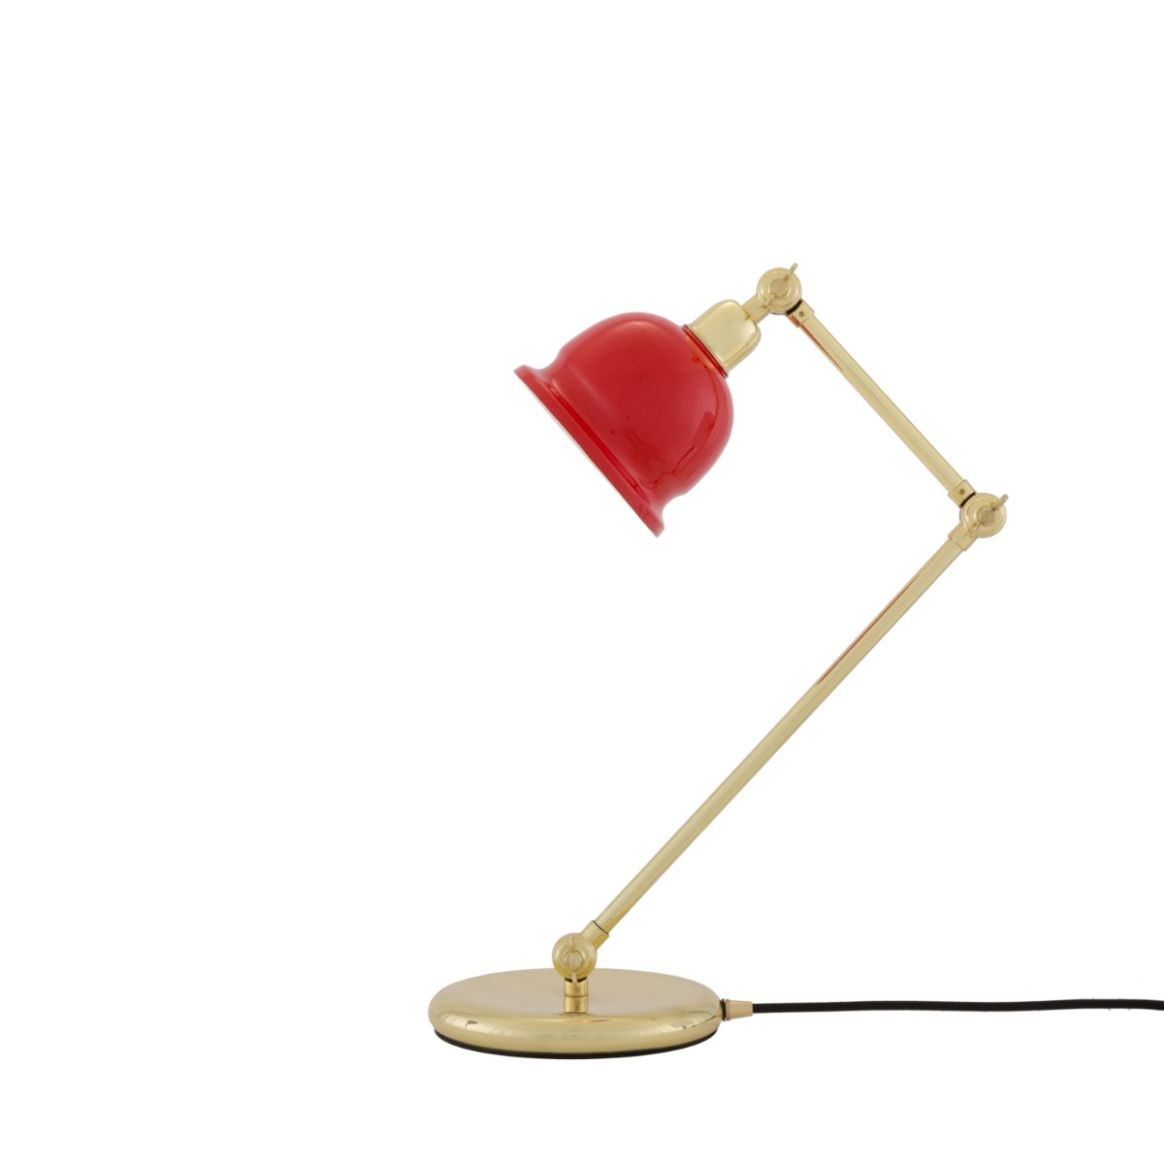 Pair of Swedish vintage brass table lamps with red shades by Aneta